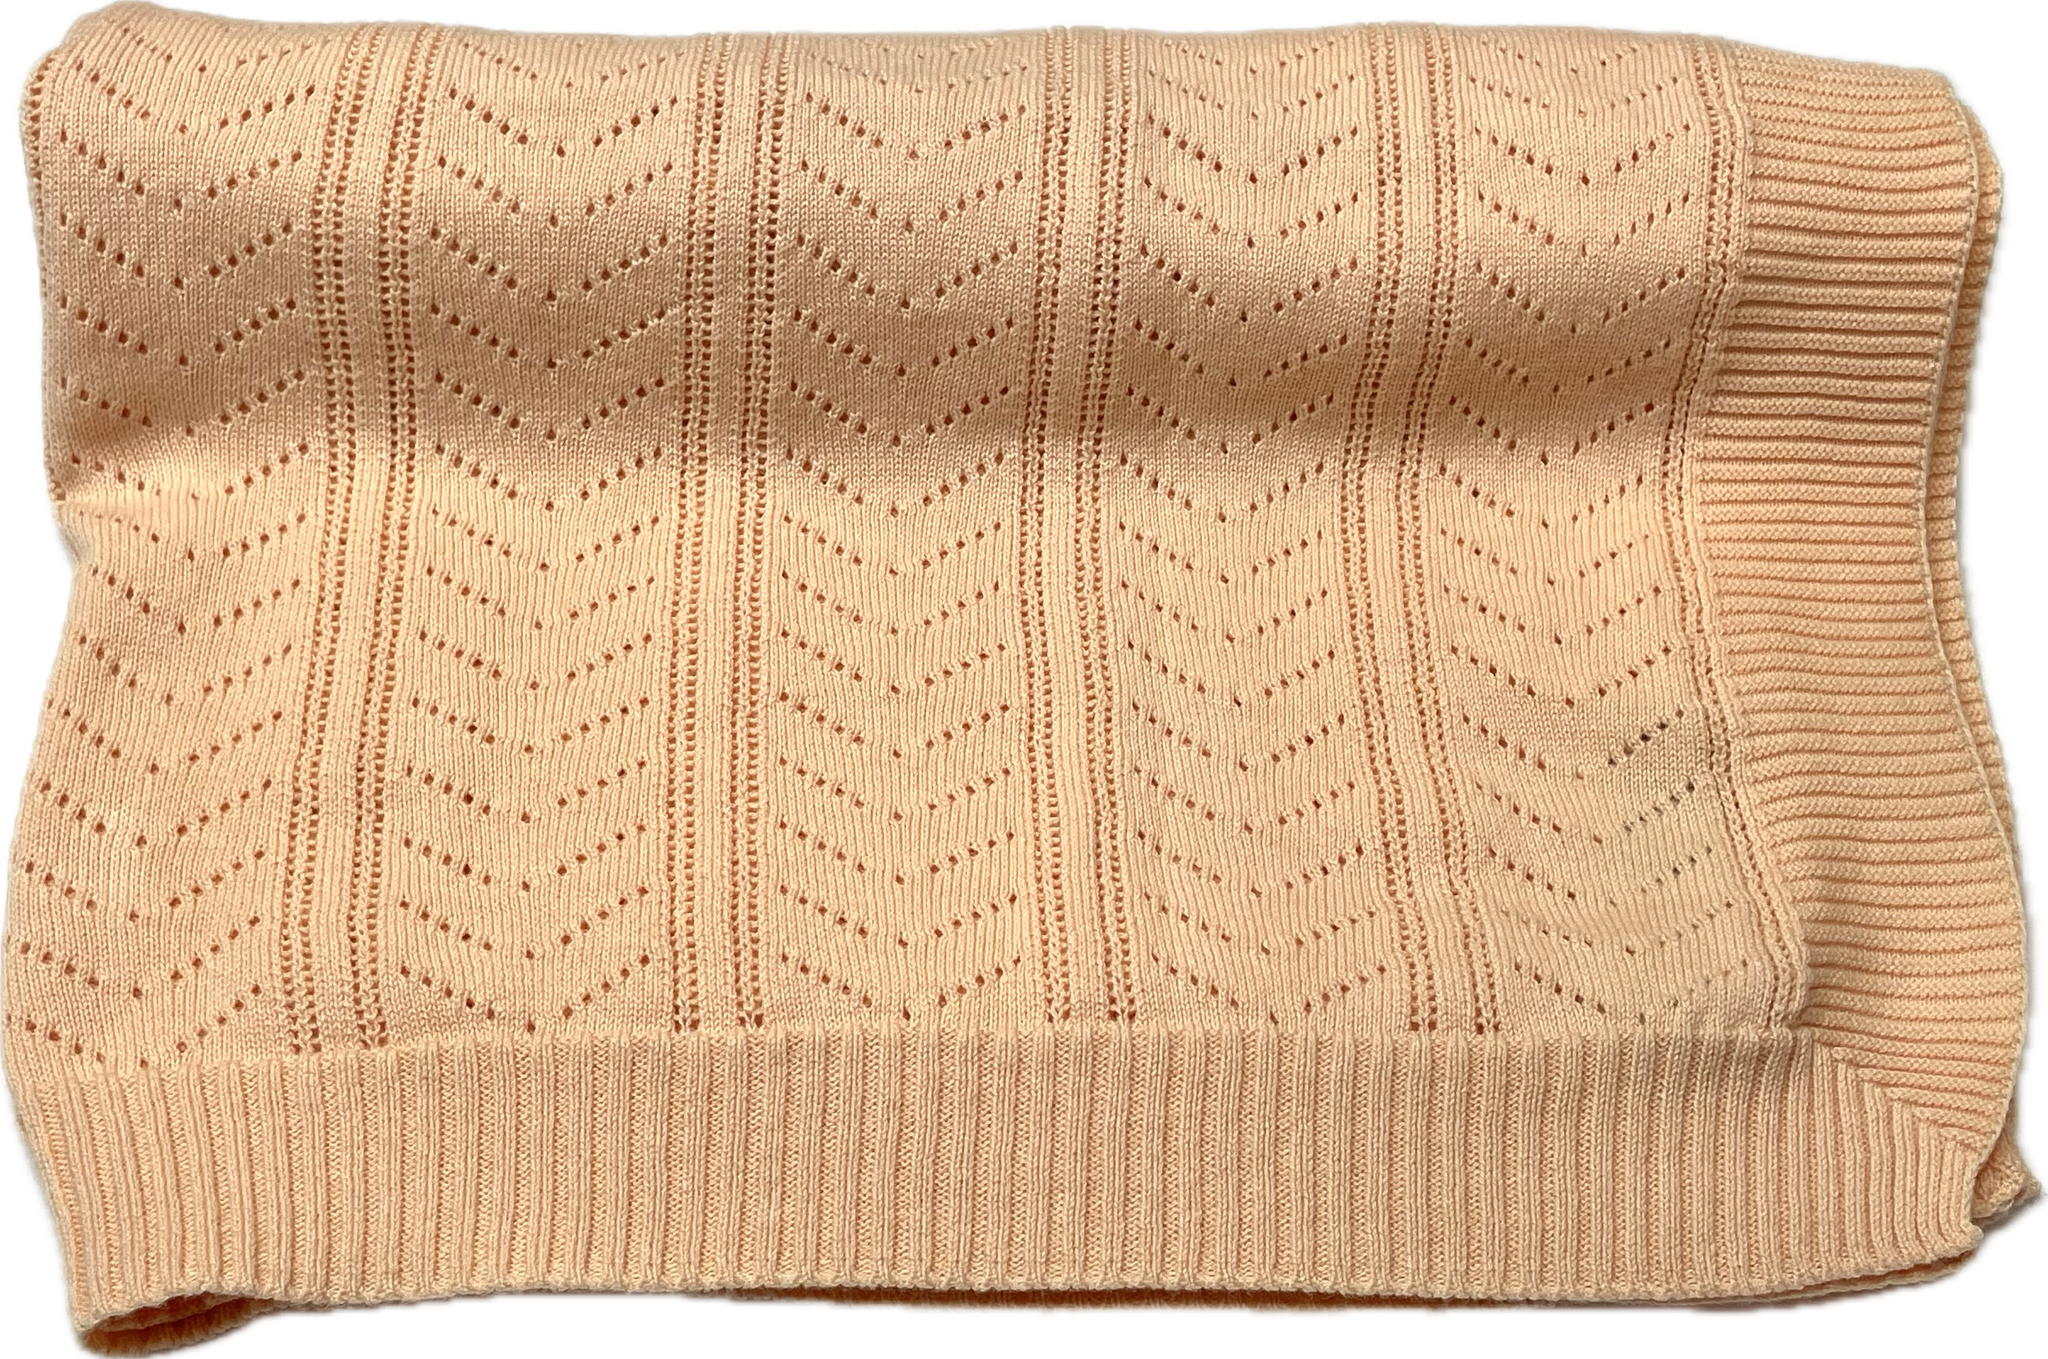 Wedoble Salmon Blanket knitted in Cotton